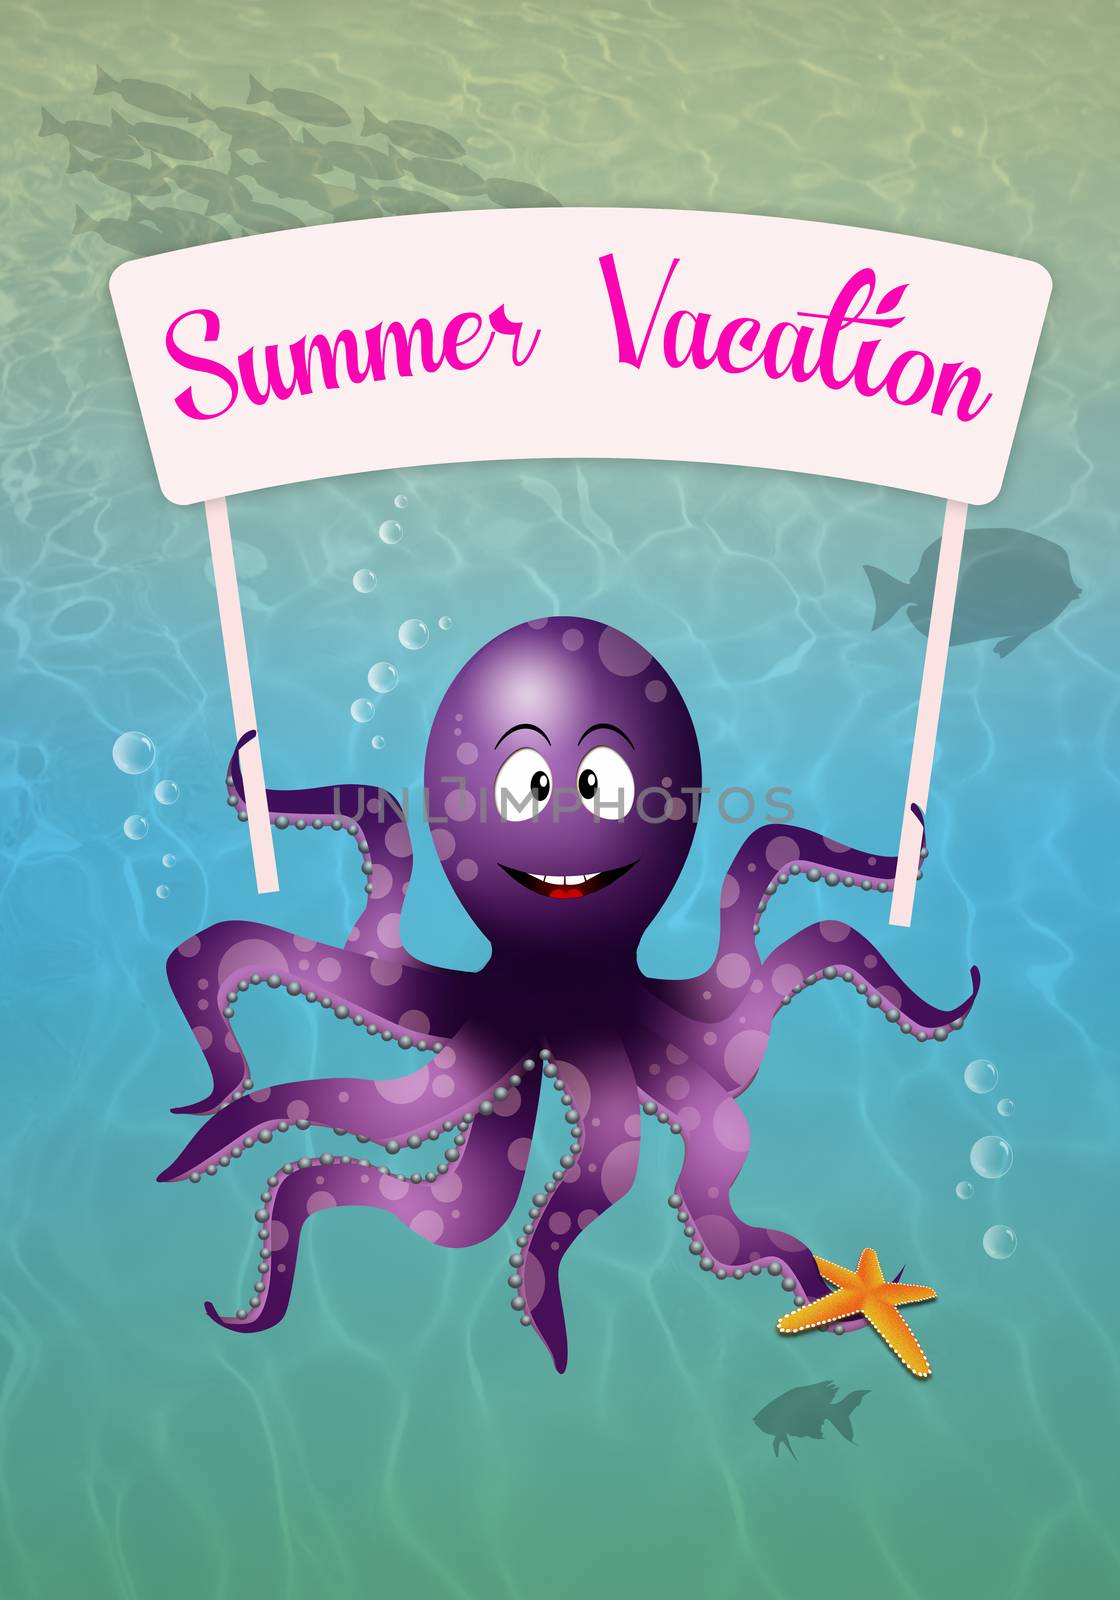 Octopus on summer vacation by sognolucido